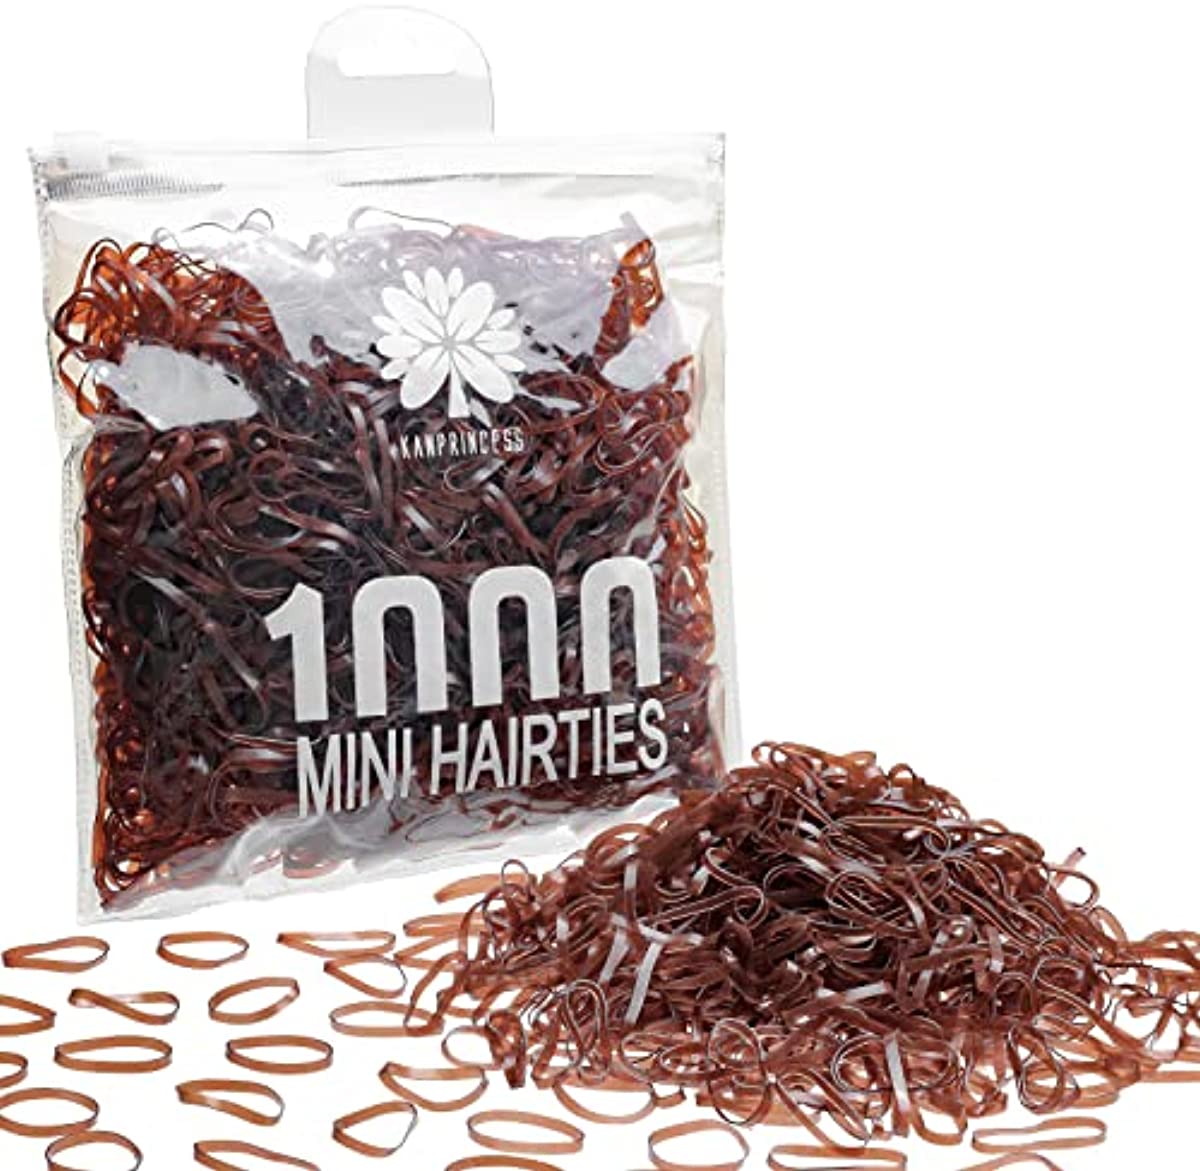 Kanprincess 1000pcs Brown Mini Elastic Rubber Bands,Soft Small Hair Ties Bands for Kids Toddlers Girls,Elastic Hair Ties for Hair Styling Braids Ponytails Hair Accessories,No Damage Baby Hair Ties Small Tiny Bands Stretch Elastics (Brown)